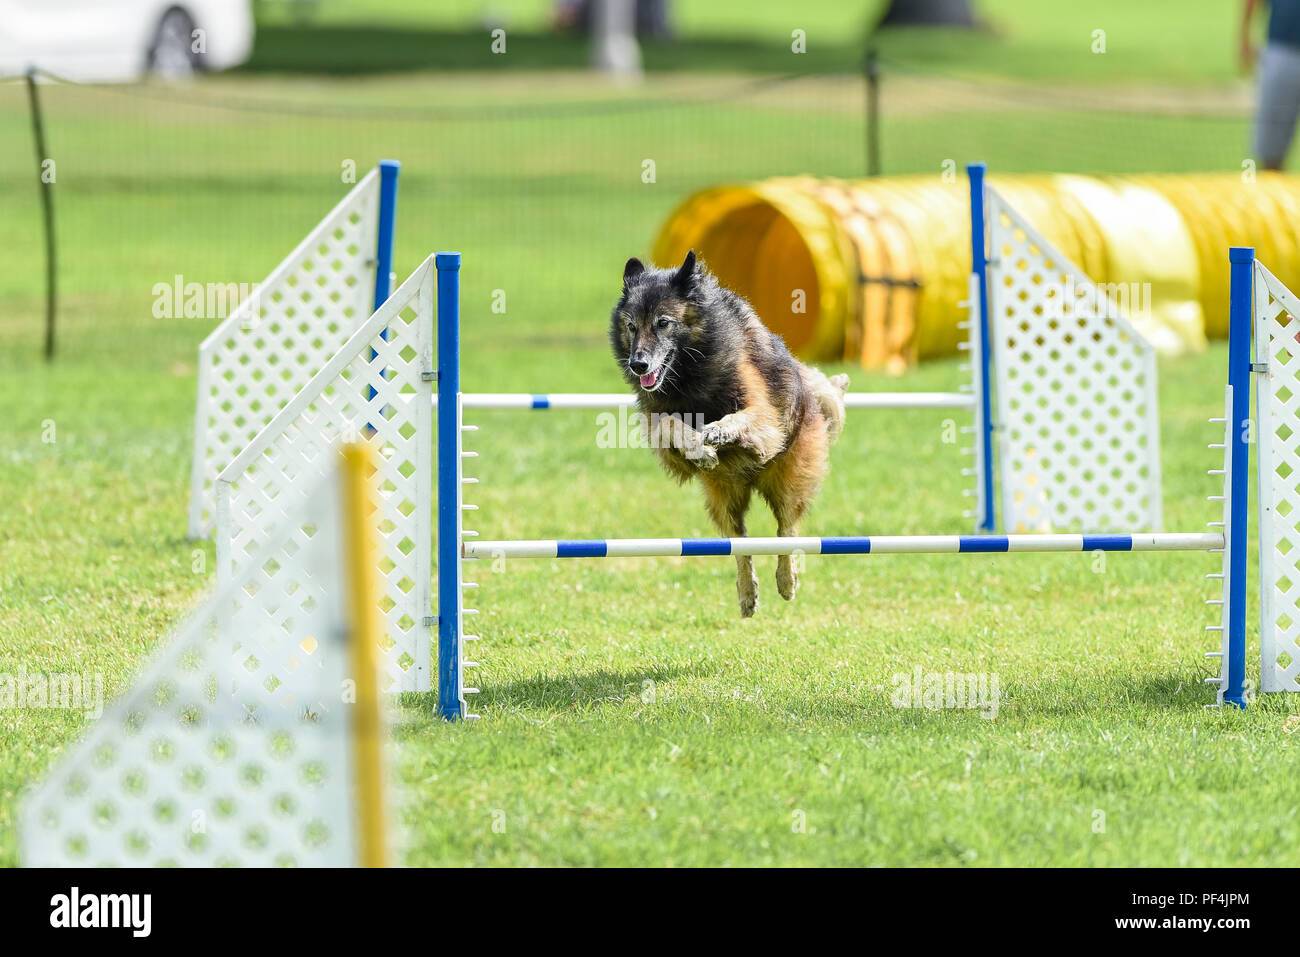 California, USA. 18 August 2018.  Keeshond Club of Southern California dog agility trails dog show at Mile Square Park in Fountain Valley, CA on August 18, 2018. Credit: Benjamin Ginsberg Credit: Benjamin Ginsberg/Alamy Live News Credit: Benjamin Ginsberg/Alamy Live News Stock Photo